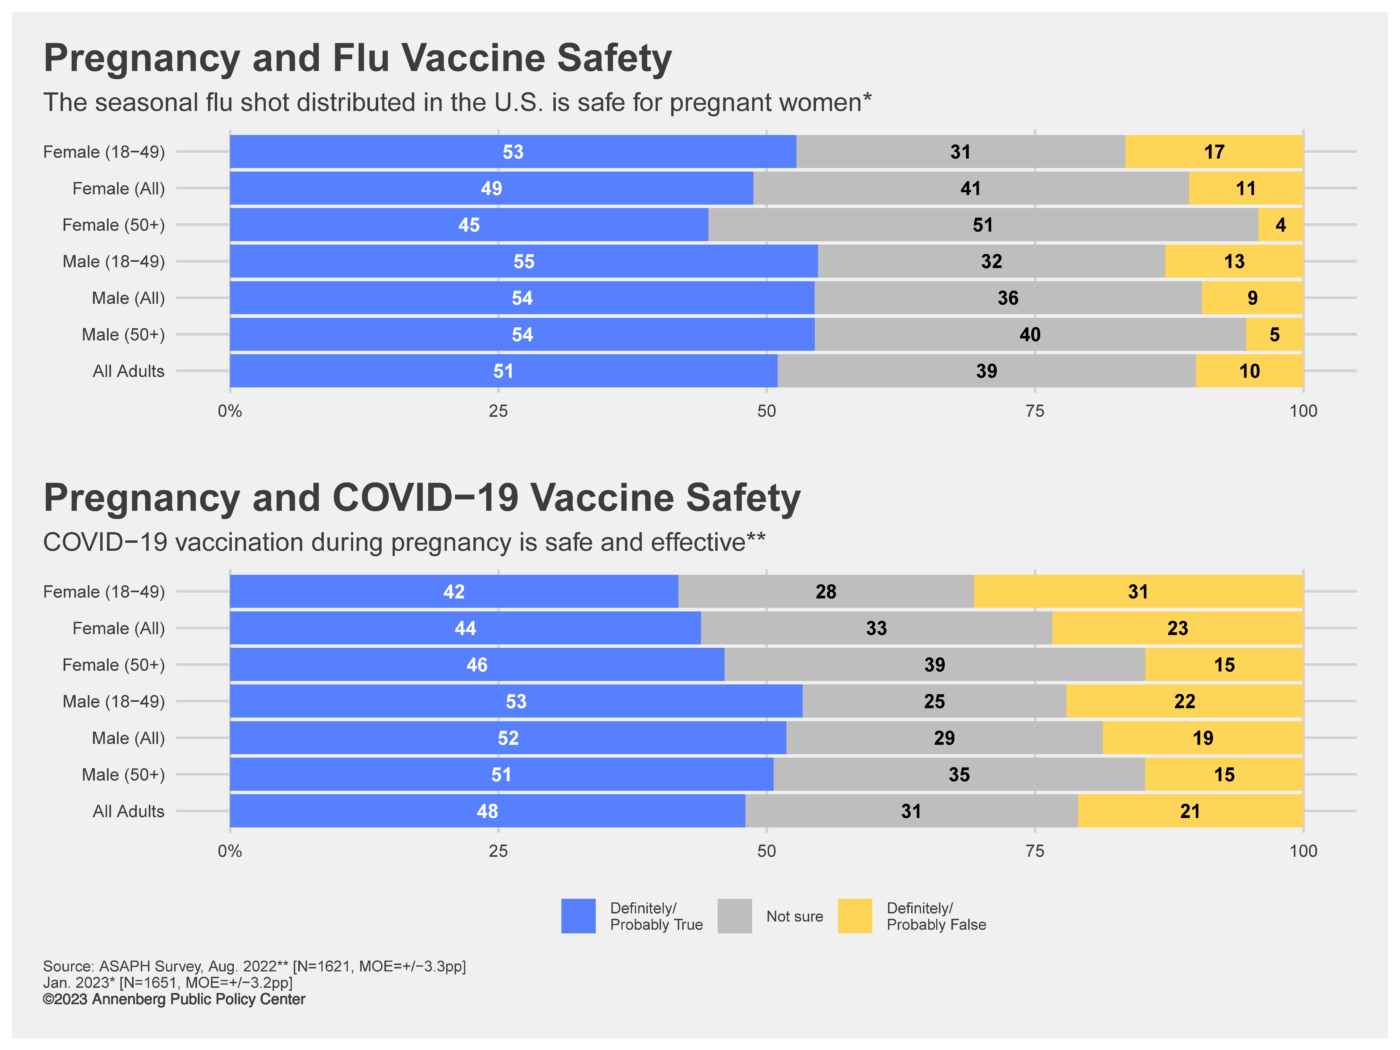 Two graphs, one measures opinions on preganacy and flu vaccine safety, the other measures opinions on pregnancy and COVID-19 vaccine safety.